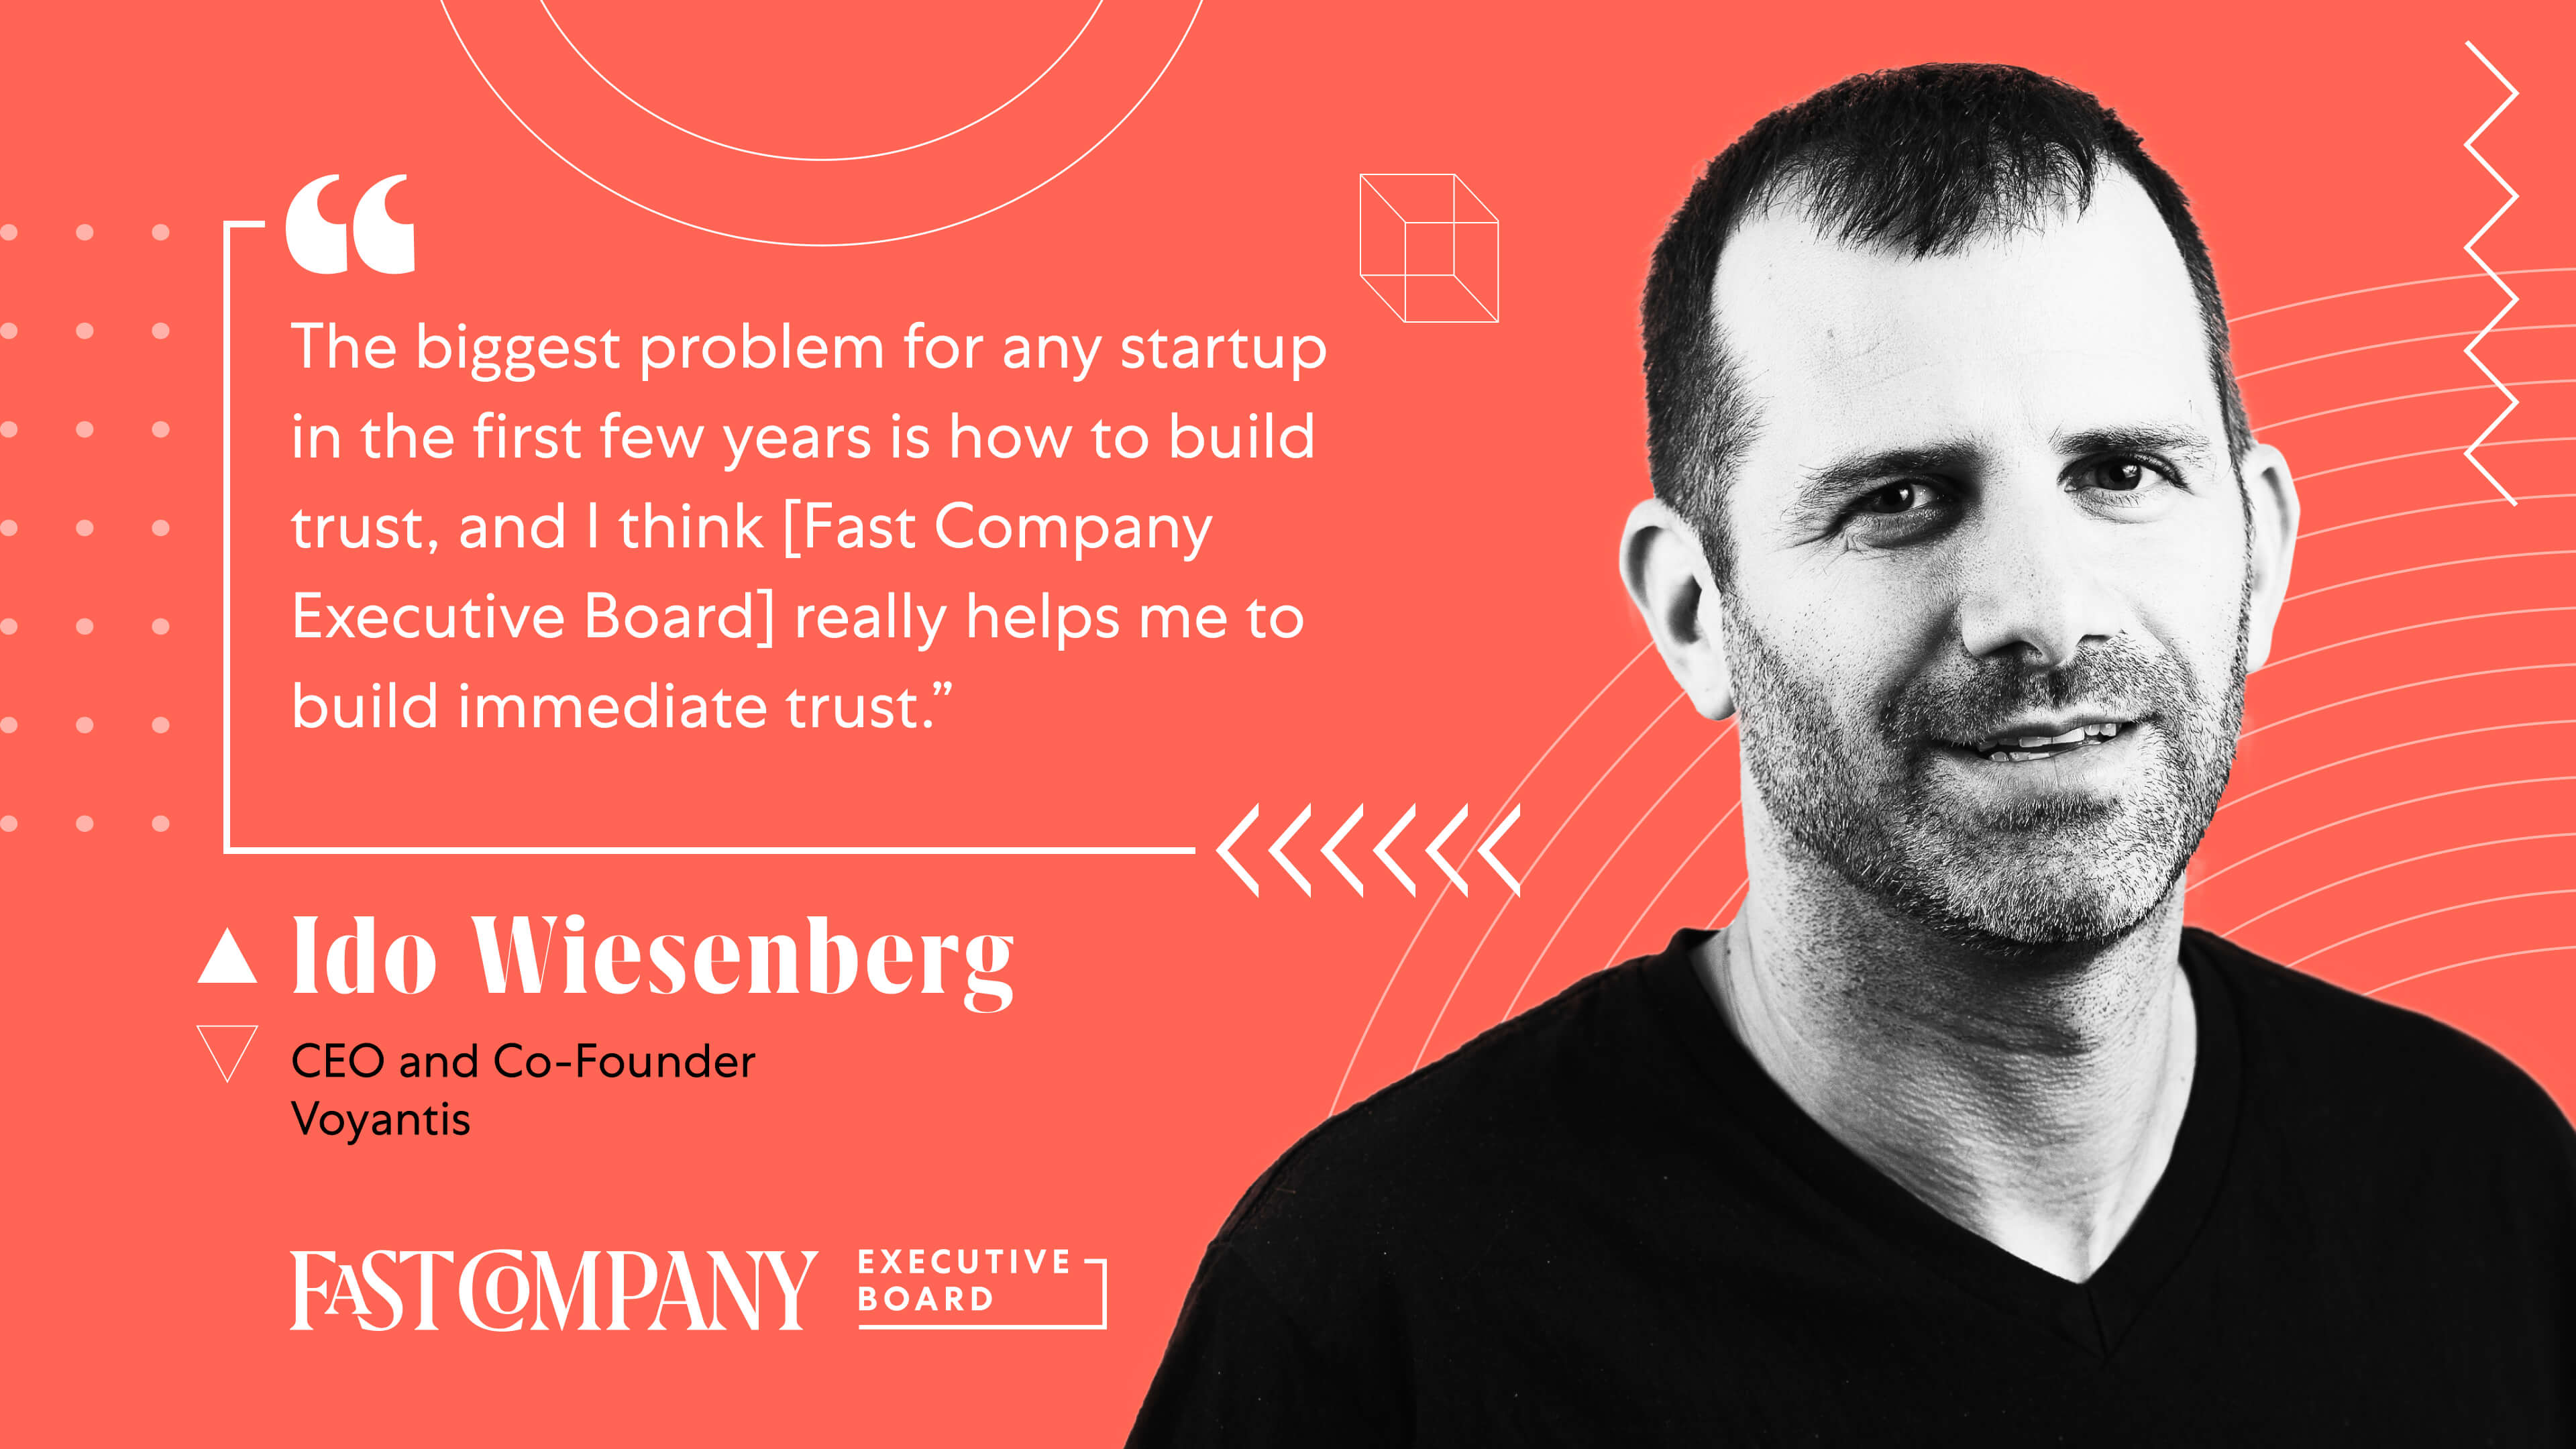 Fast Company Executive Board Helps Build Trust for Ido Wiesenberg’s Startup